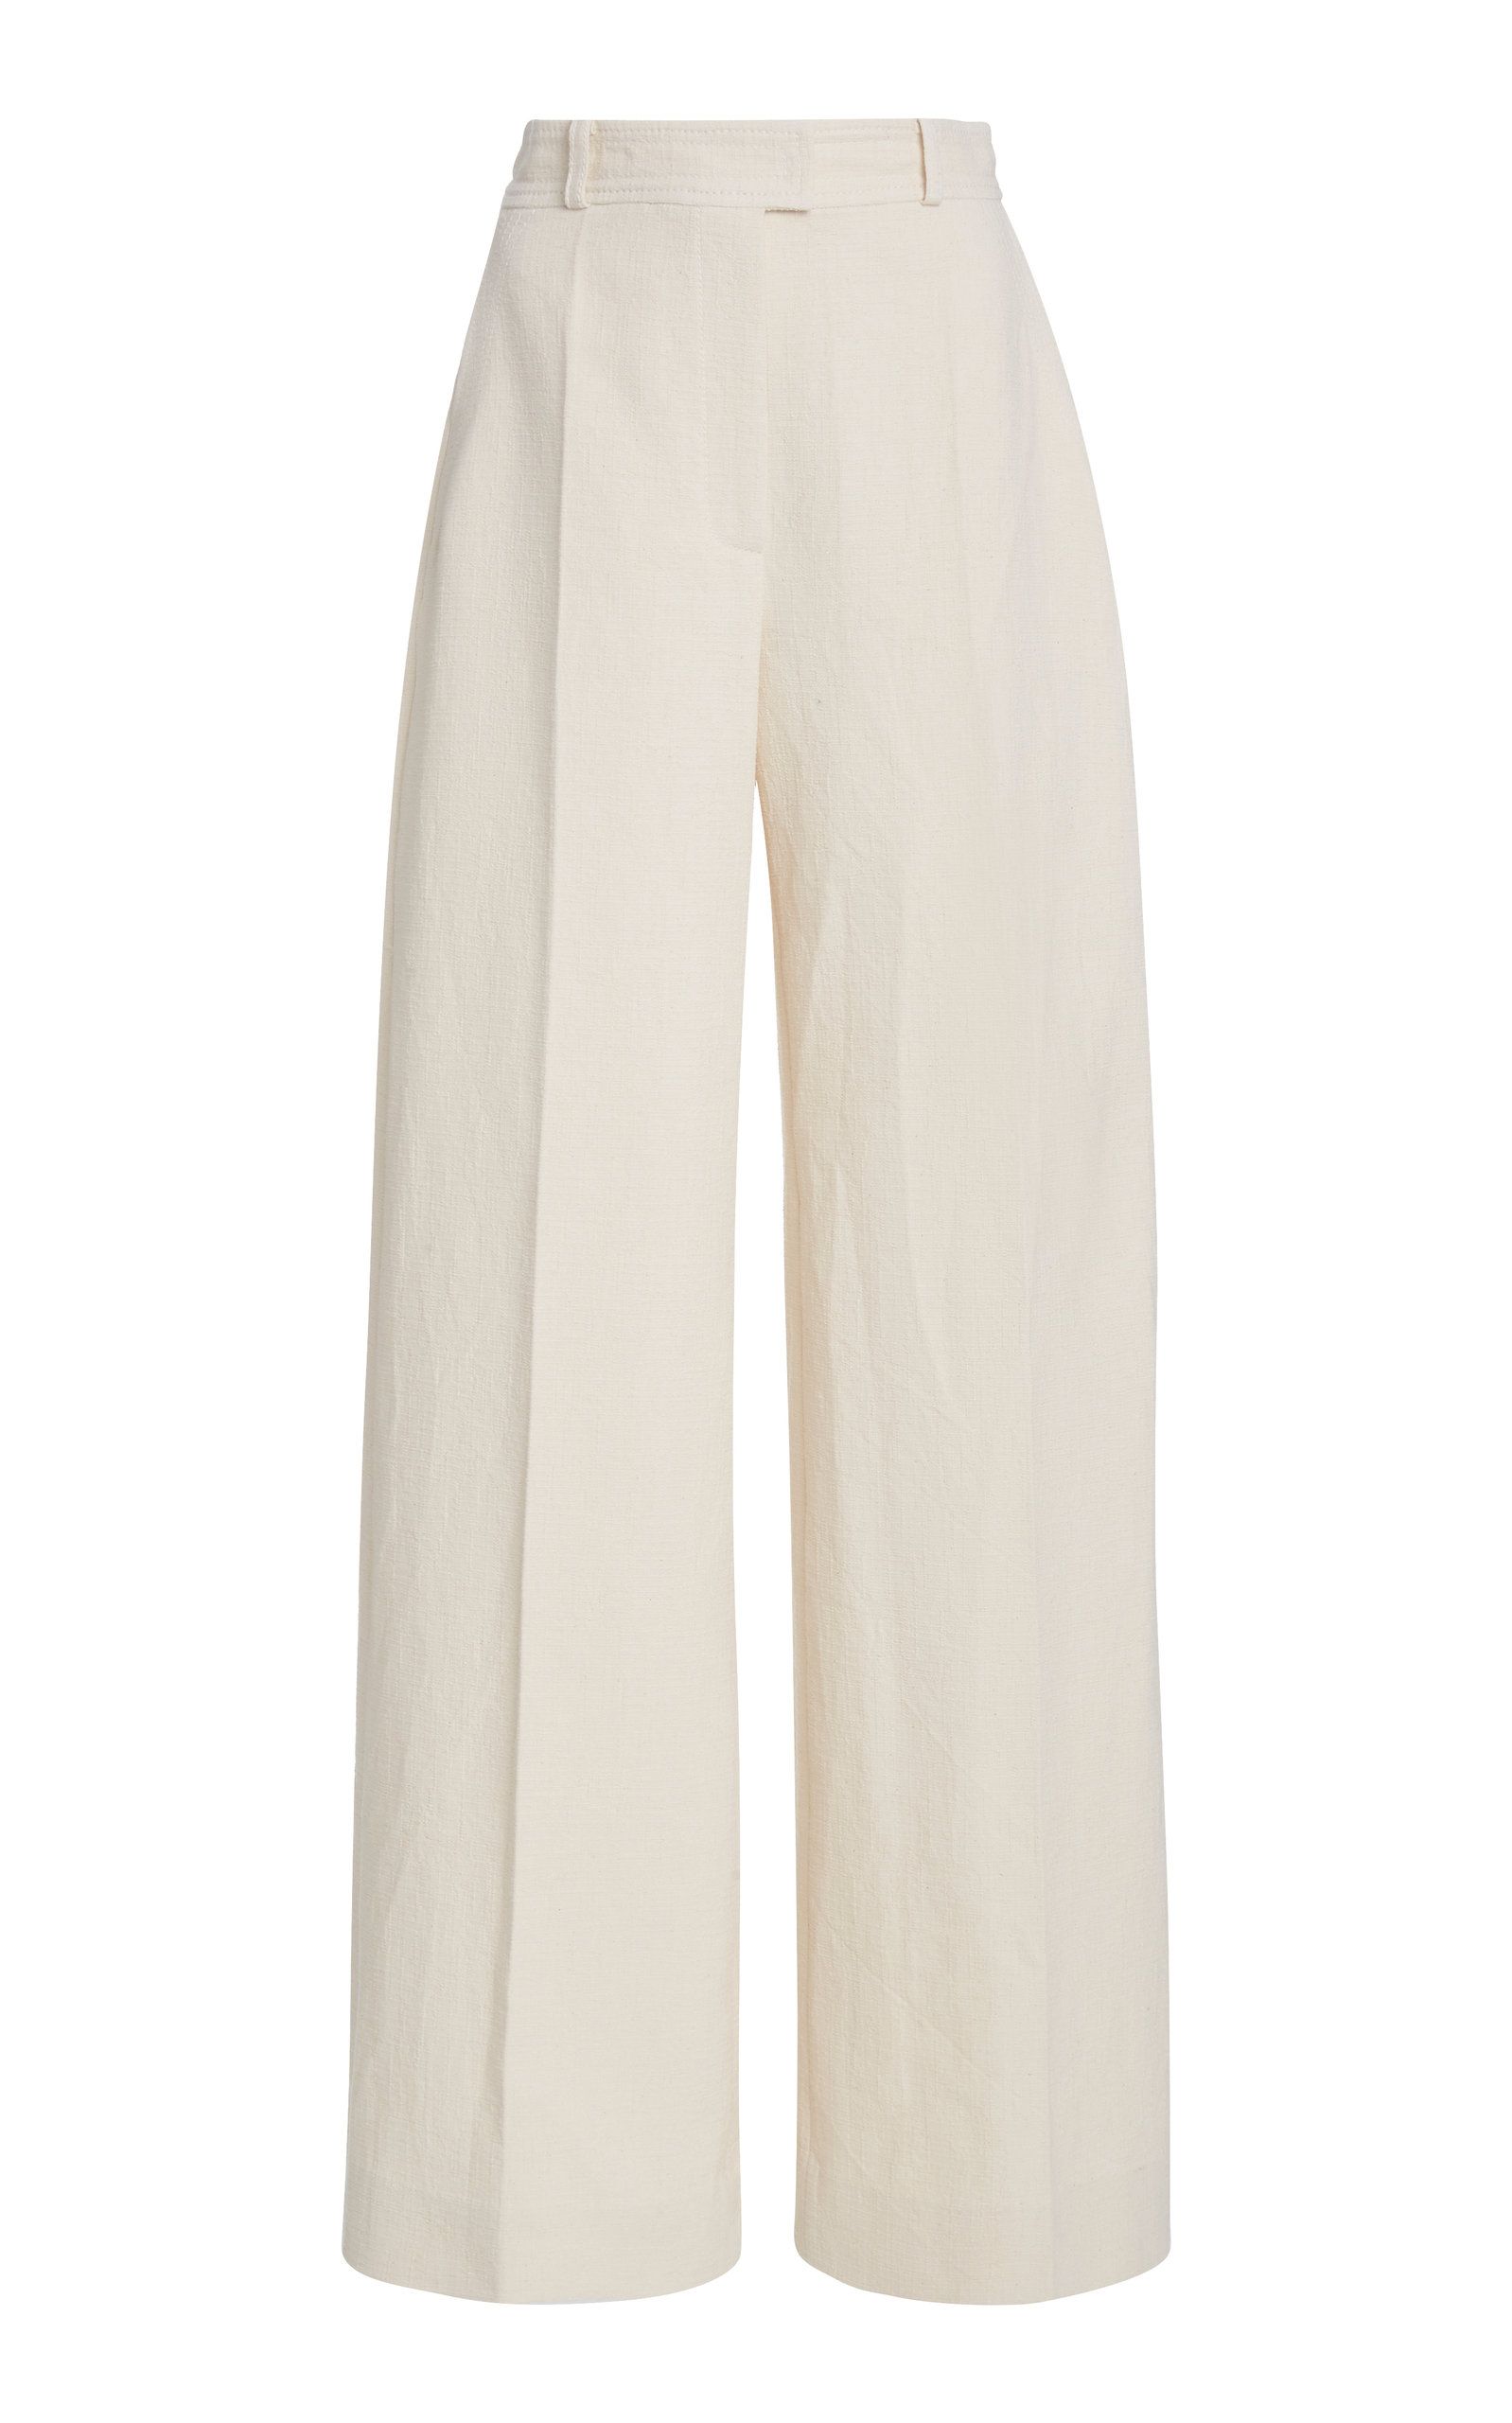 Timeless Elegance: Stay Sharp in White Trousers